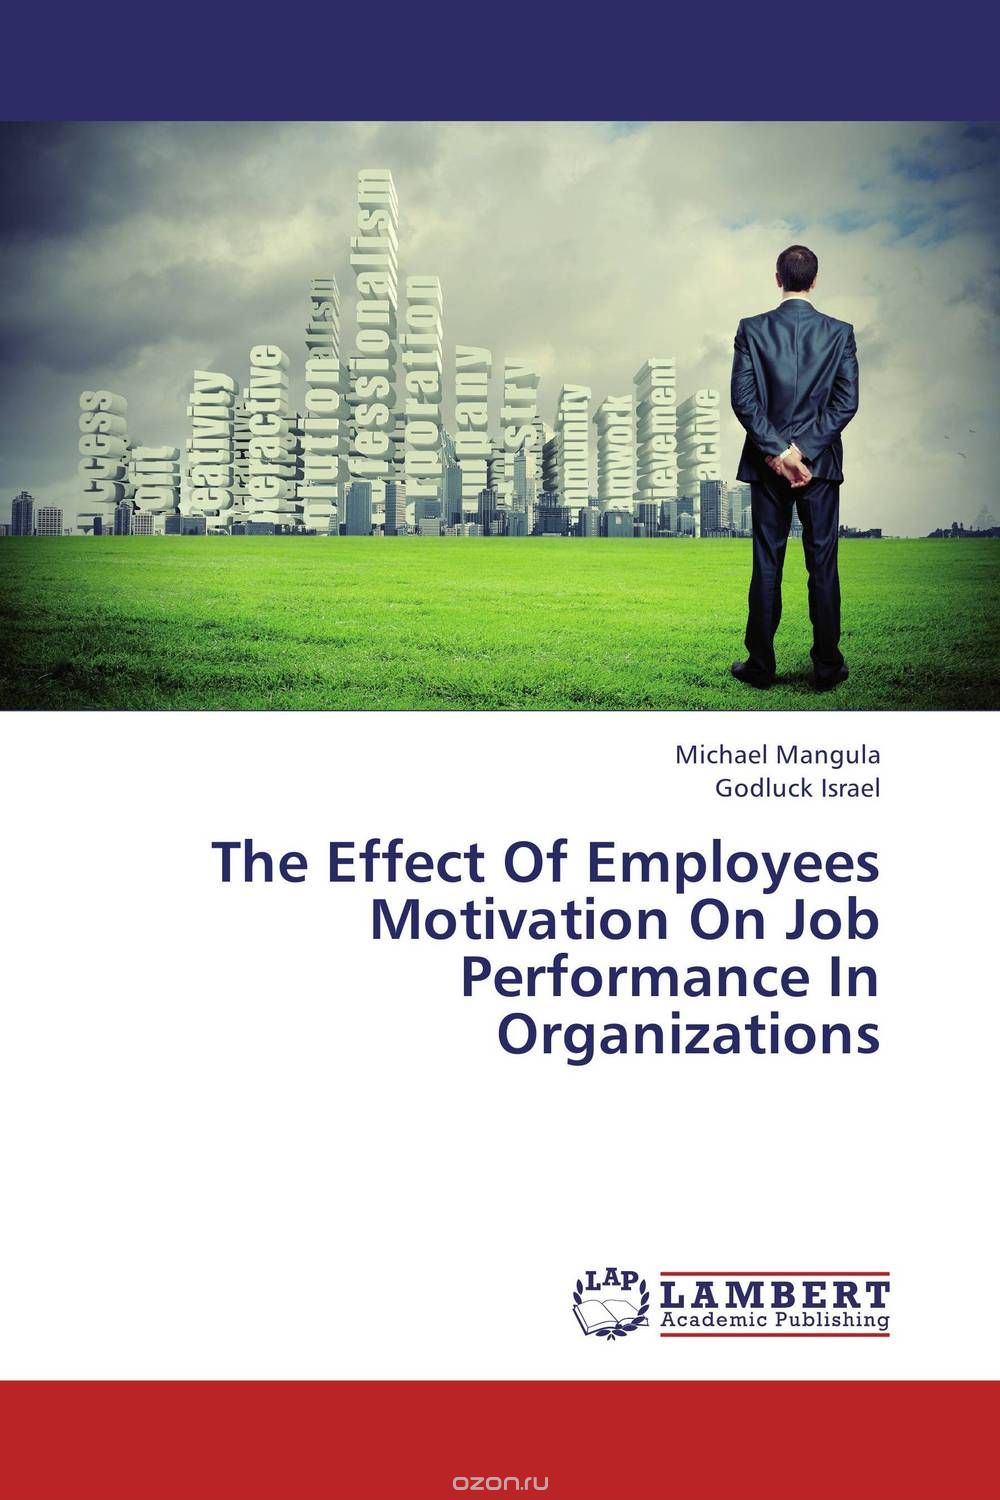 The Effect Of Employees Motivation On Job Performance In Organizations